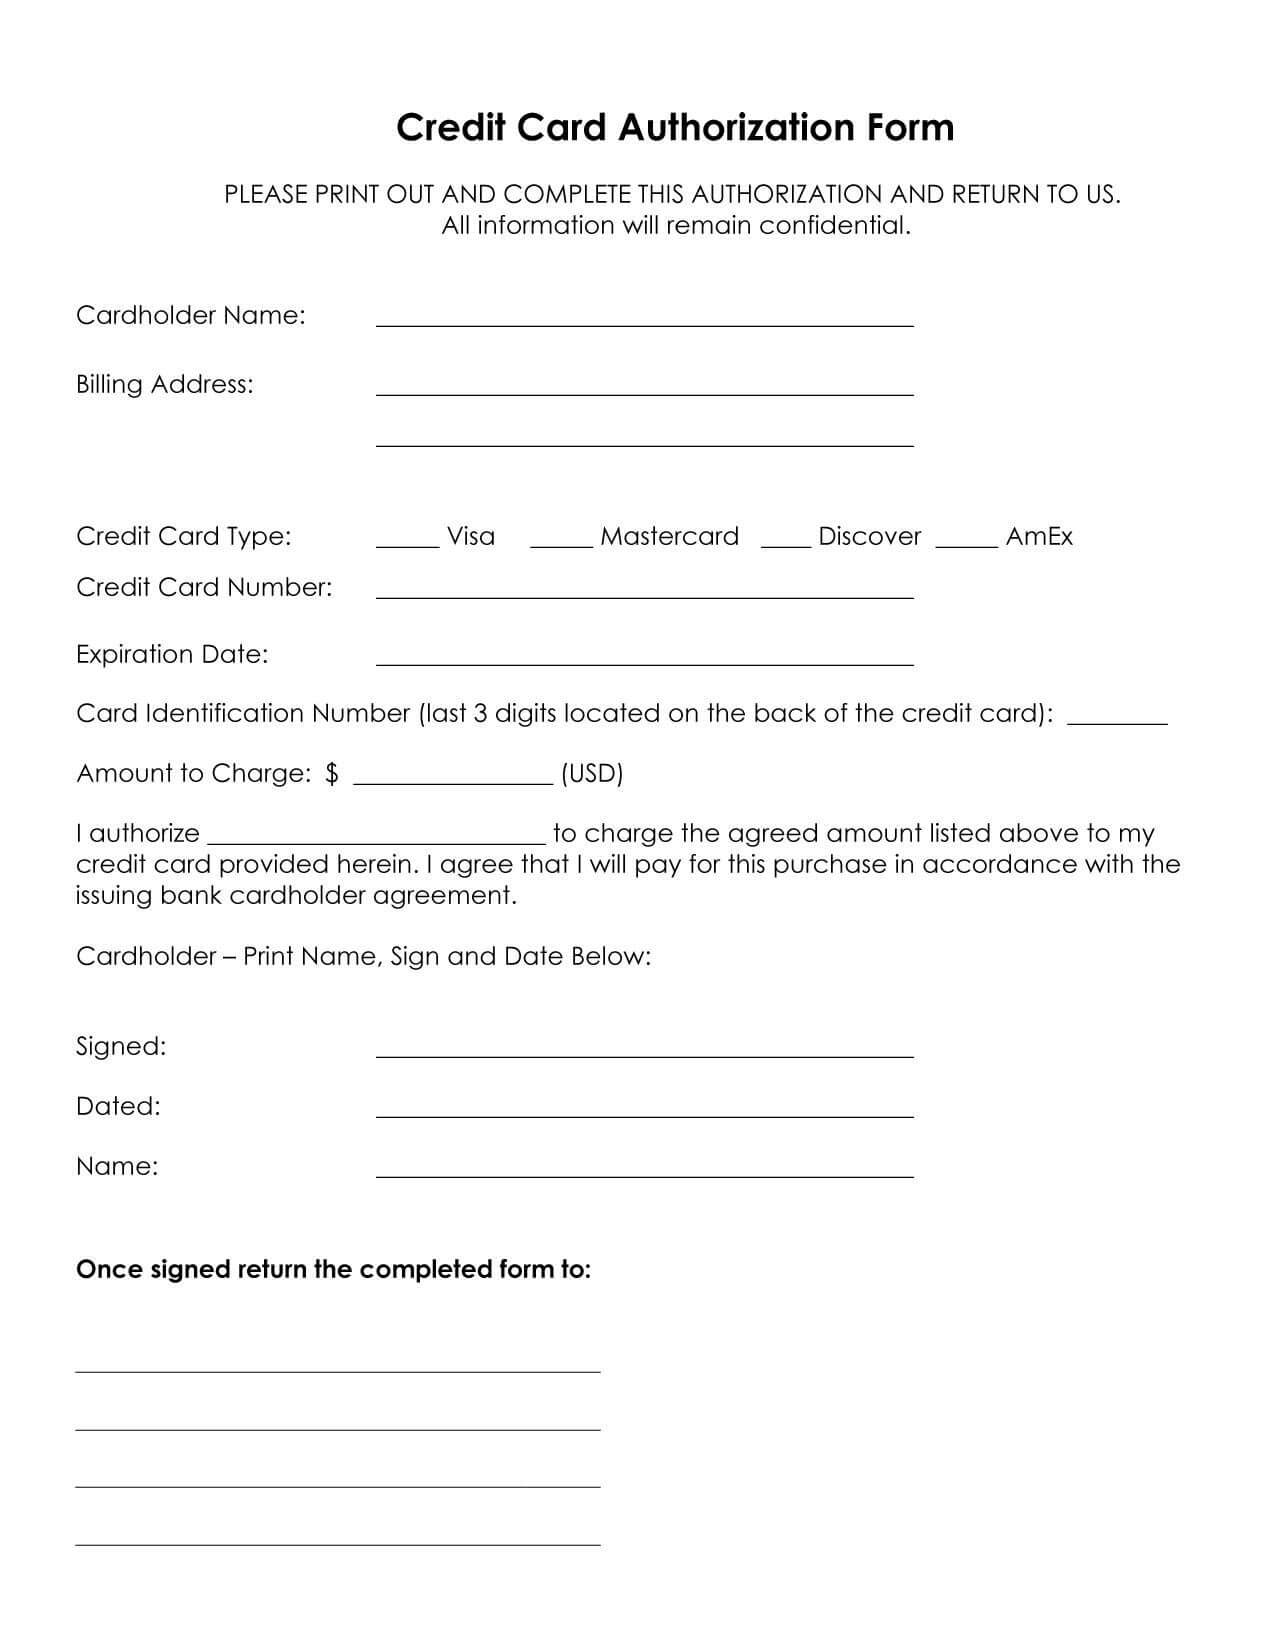 Credit Card Authorization Form Template In 2020 | Credit Inside Credit Card Authorization Form Template Word